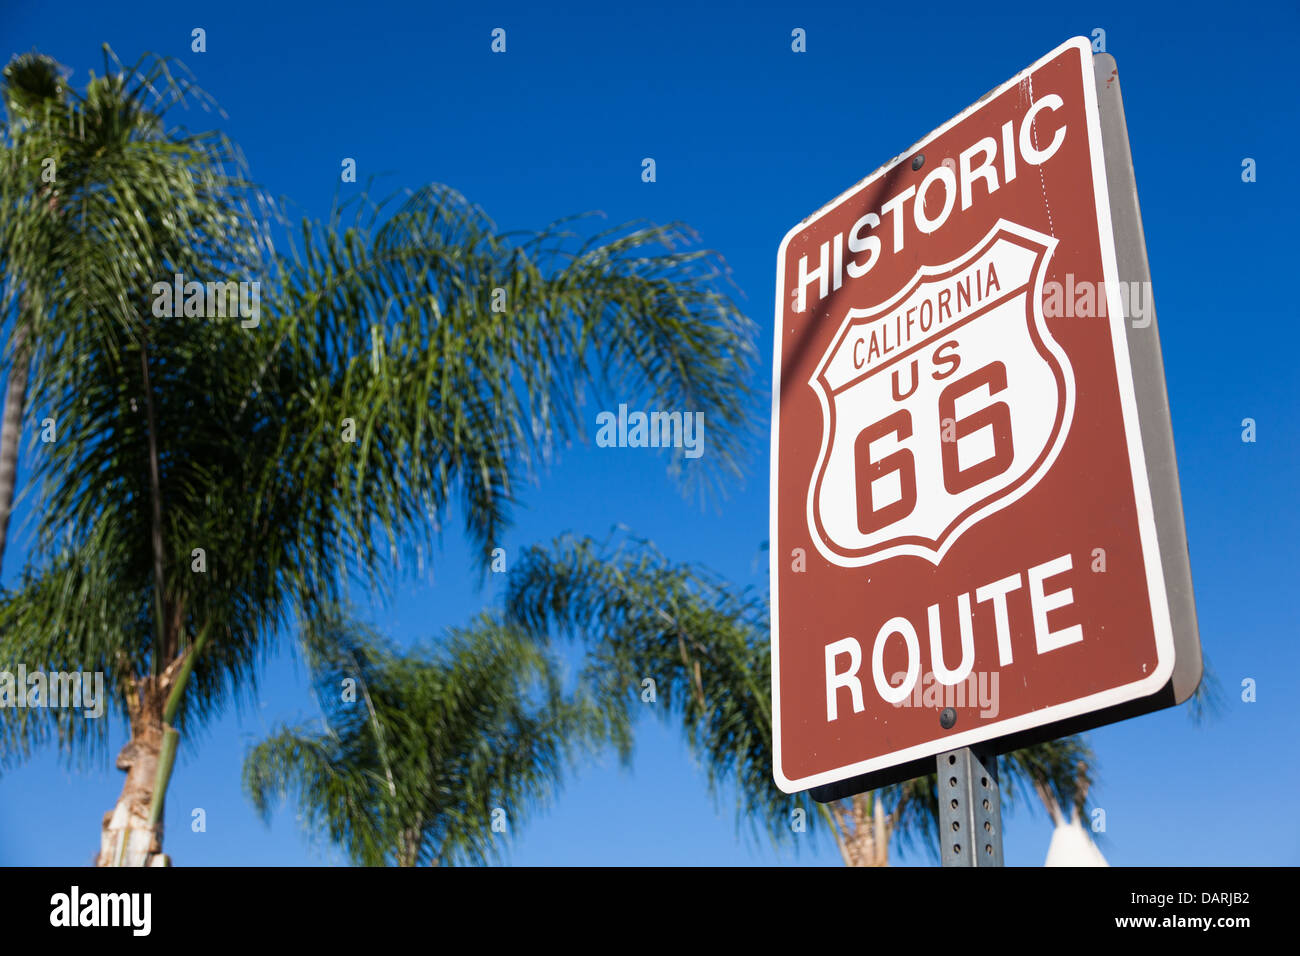 An historic route 66 highway sign with palm tree branches and a blue sky background Stock Photo